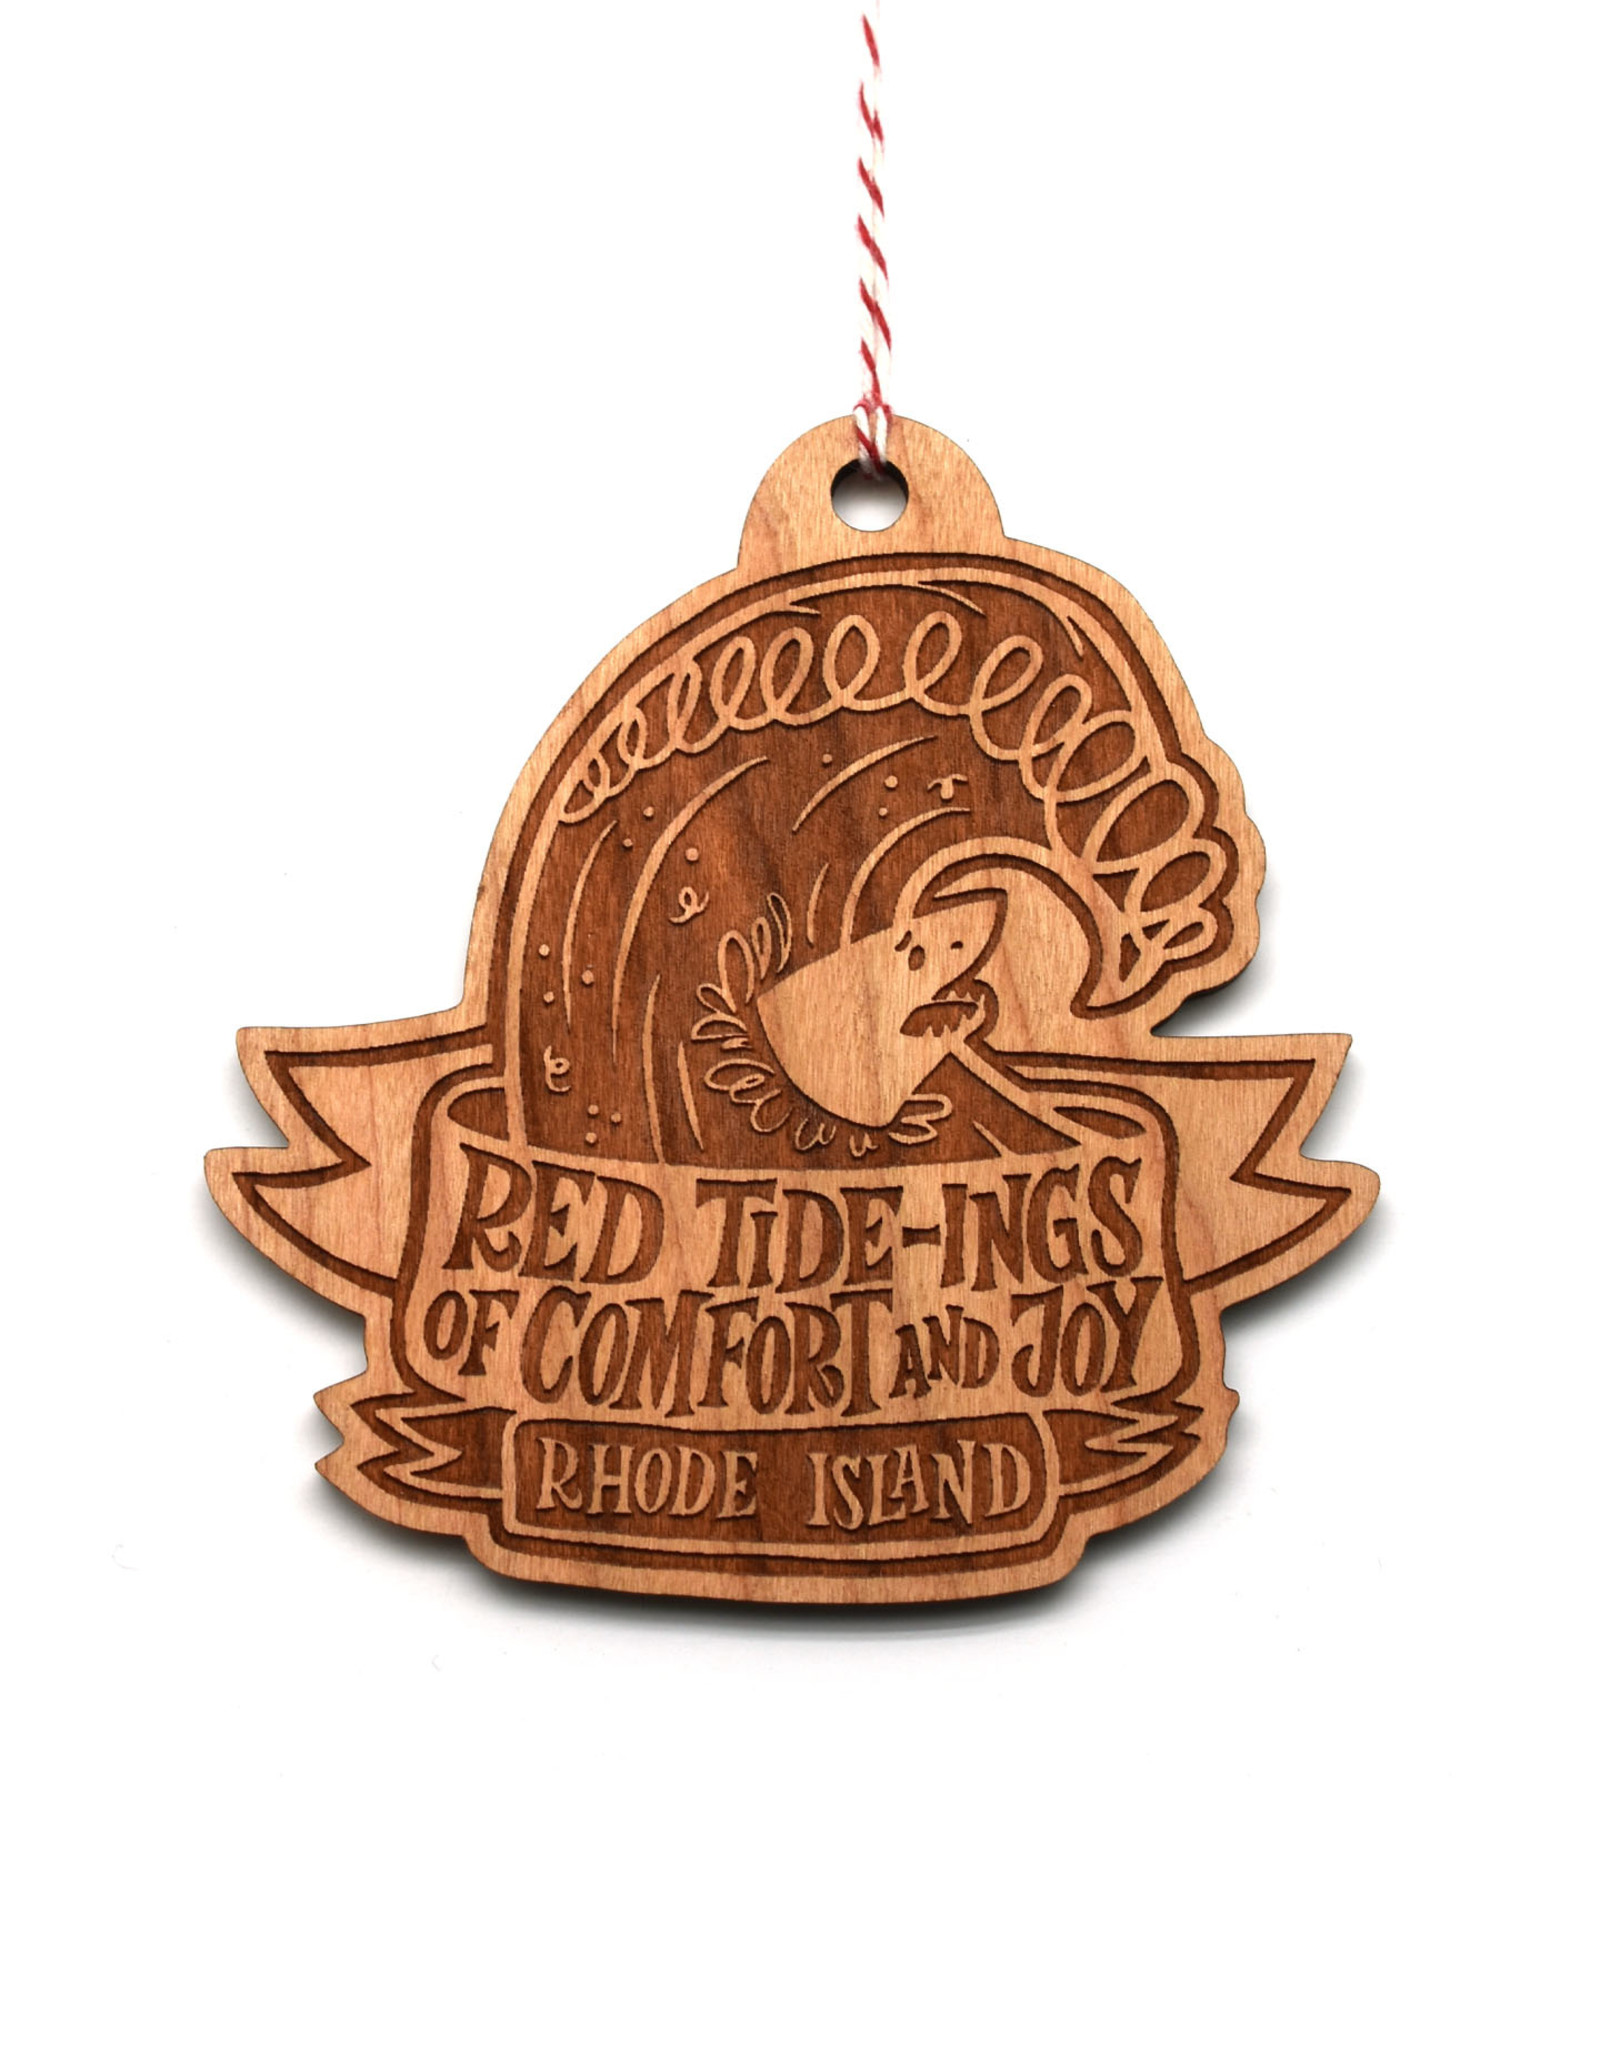 Red Tide-ings Ornament